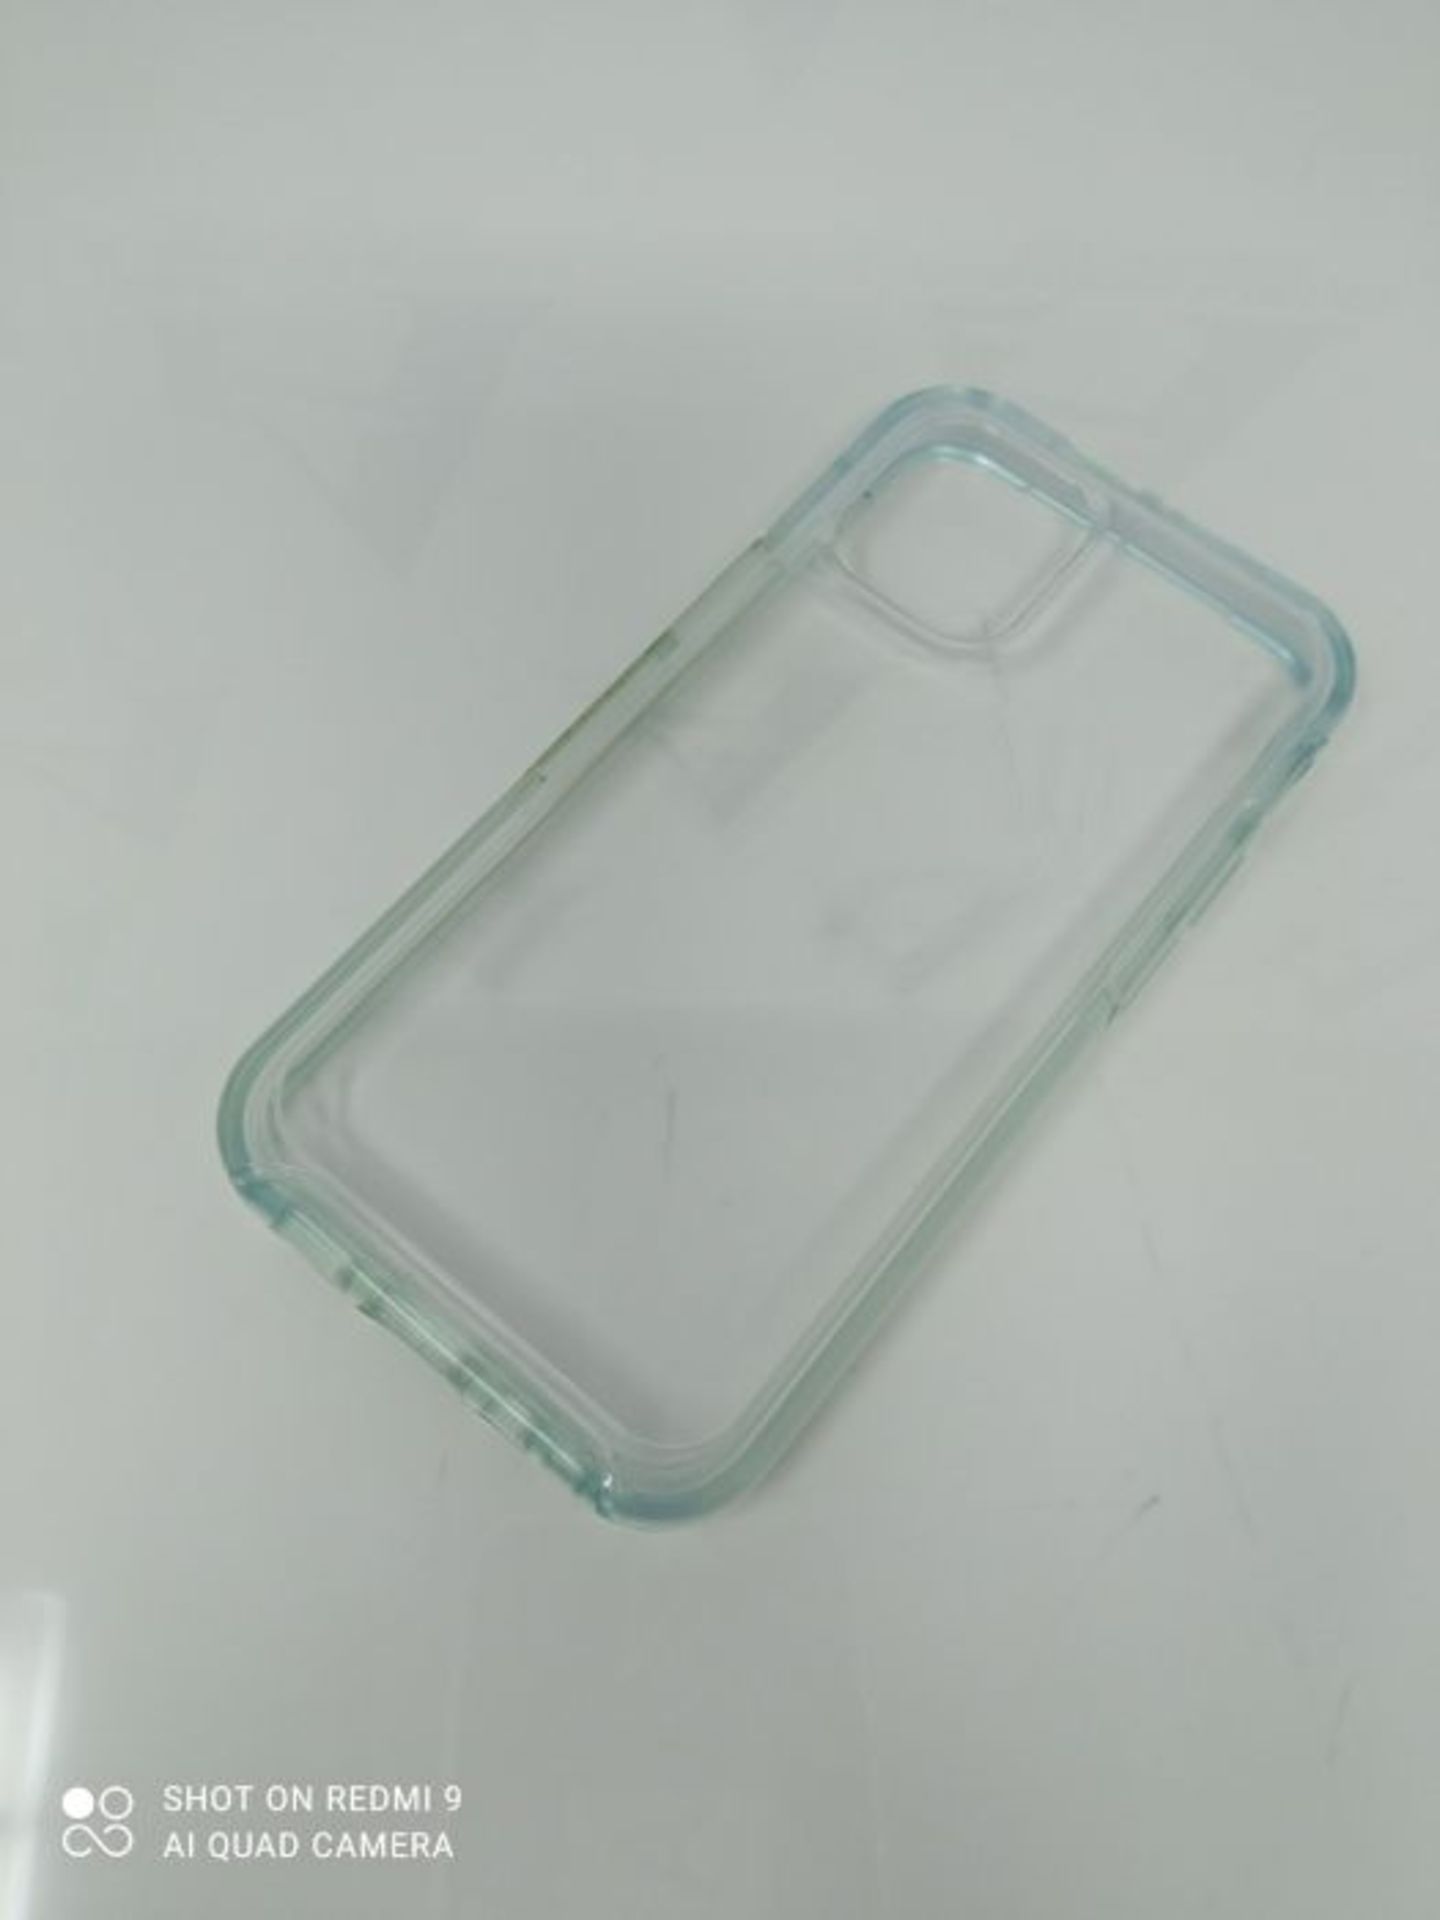 OtterBox for Apple iPhone 12 mini, Sleek Drop Proof Protective Clear Case, Symmetry Cl - Image 2 of 3